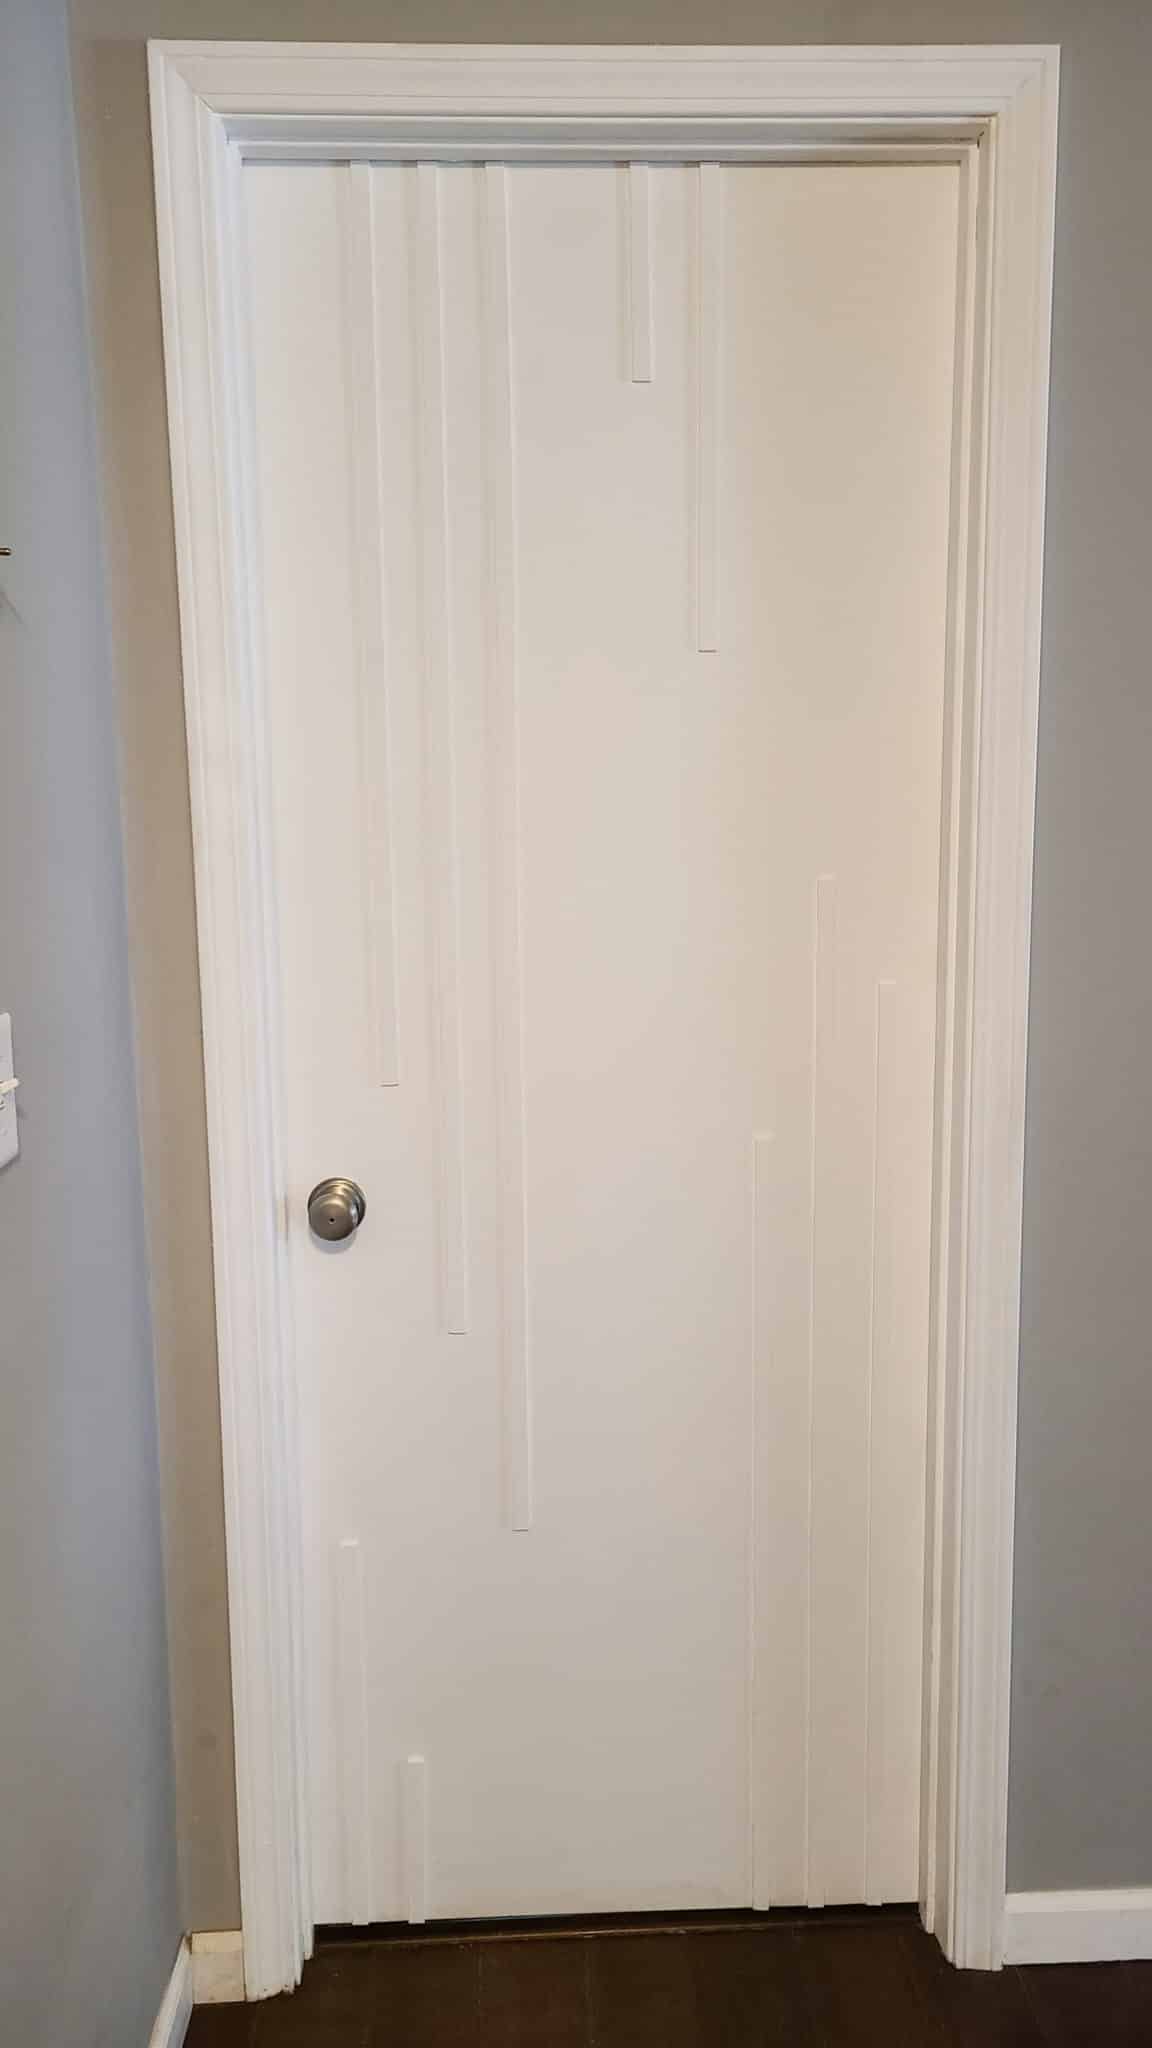 finished interior door makeover project showing white door with wood strip accents